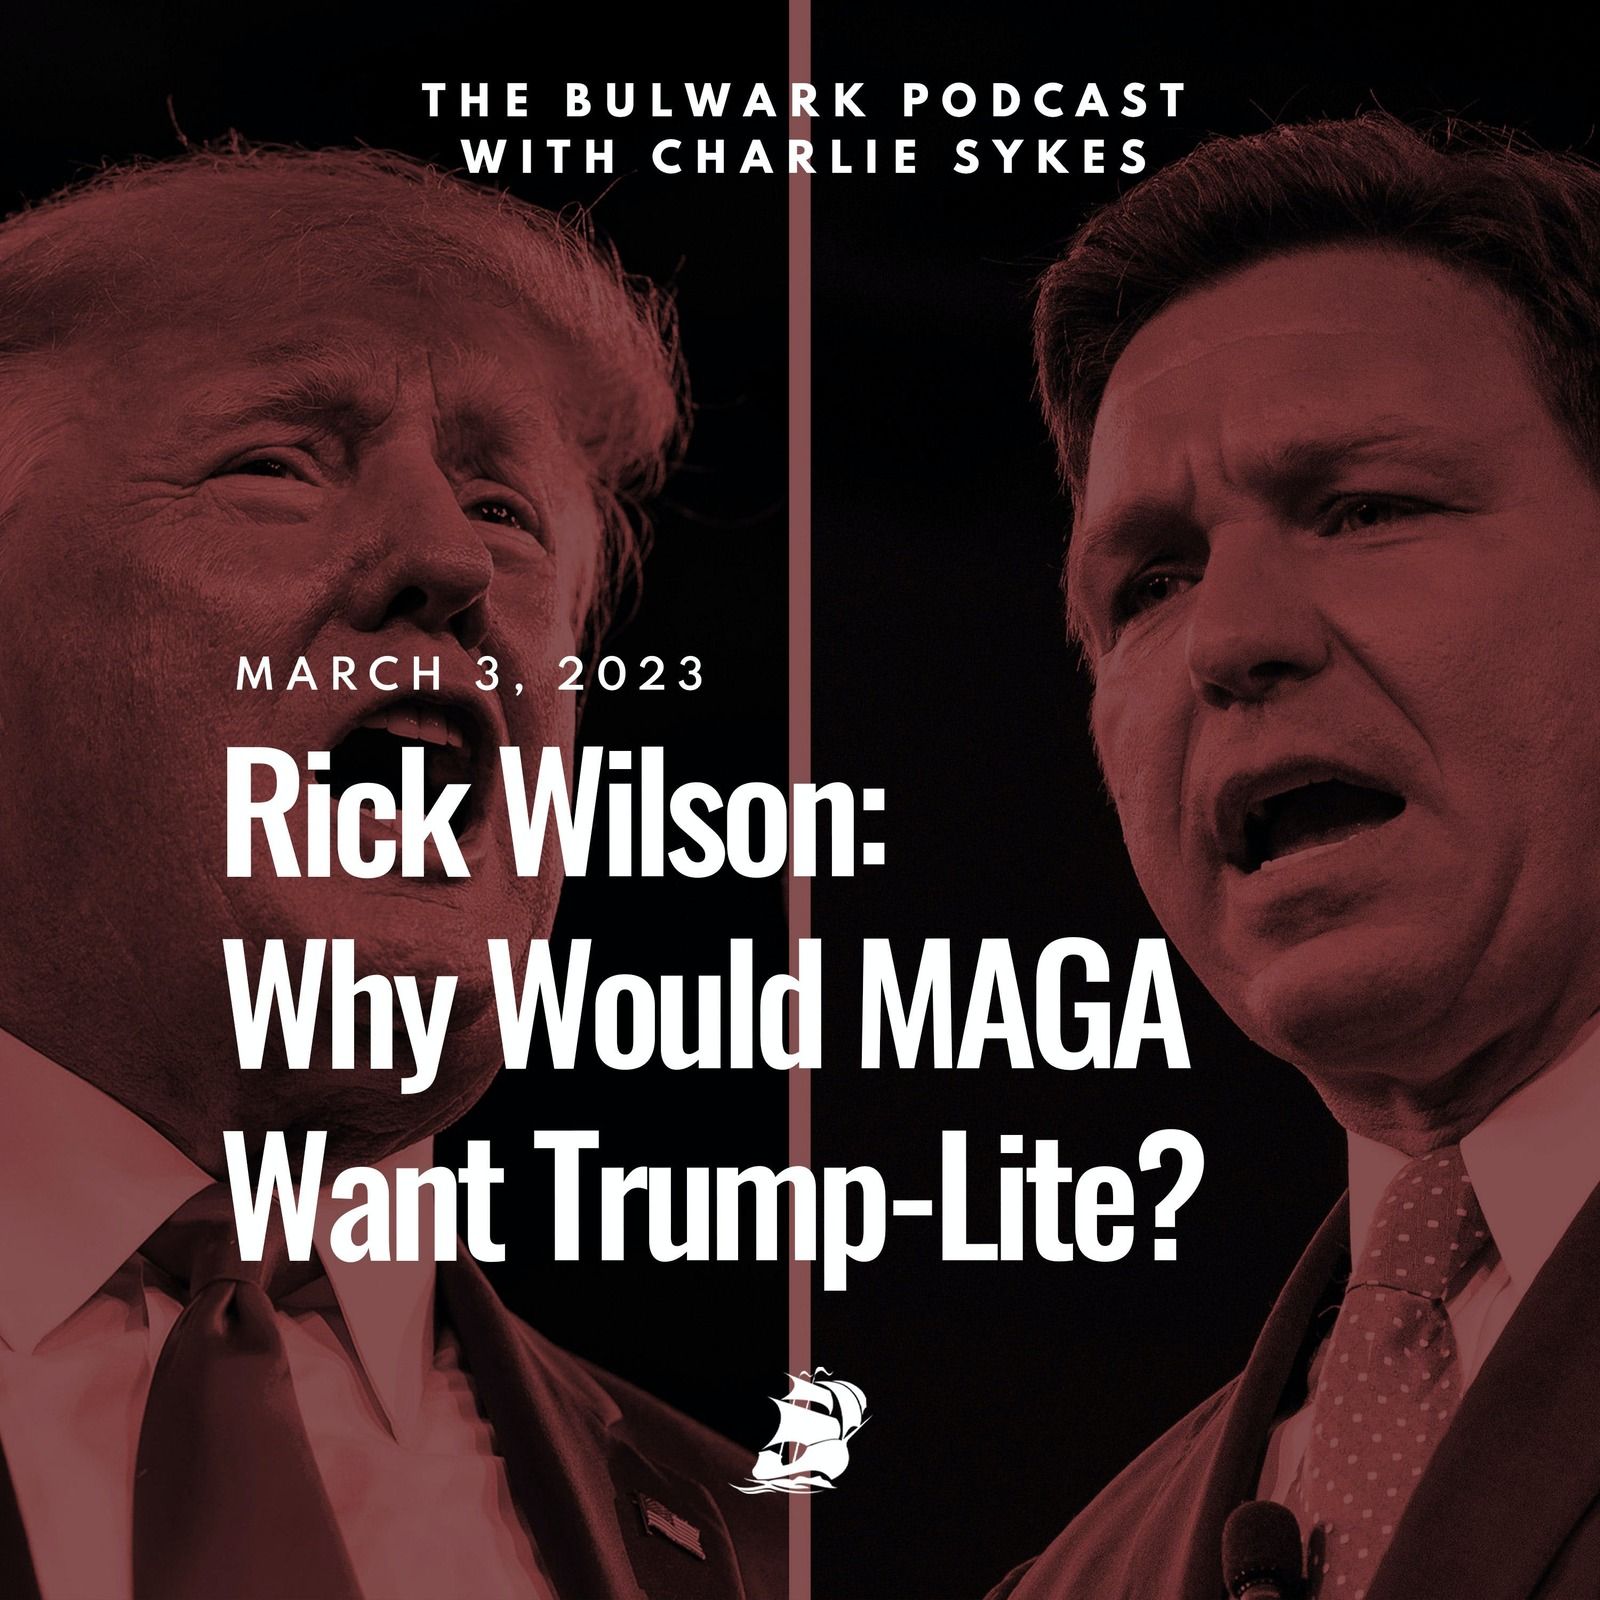 Rick Wilson: Why Would MAGA Want Trump-Lite? by The Bulwark Podcast